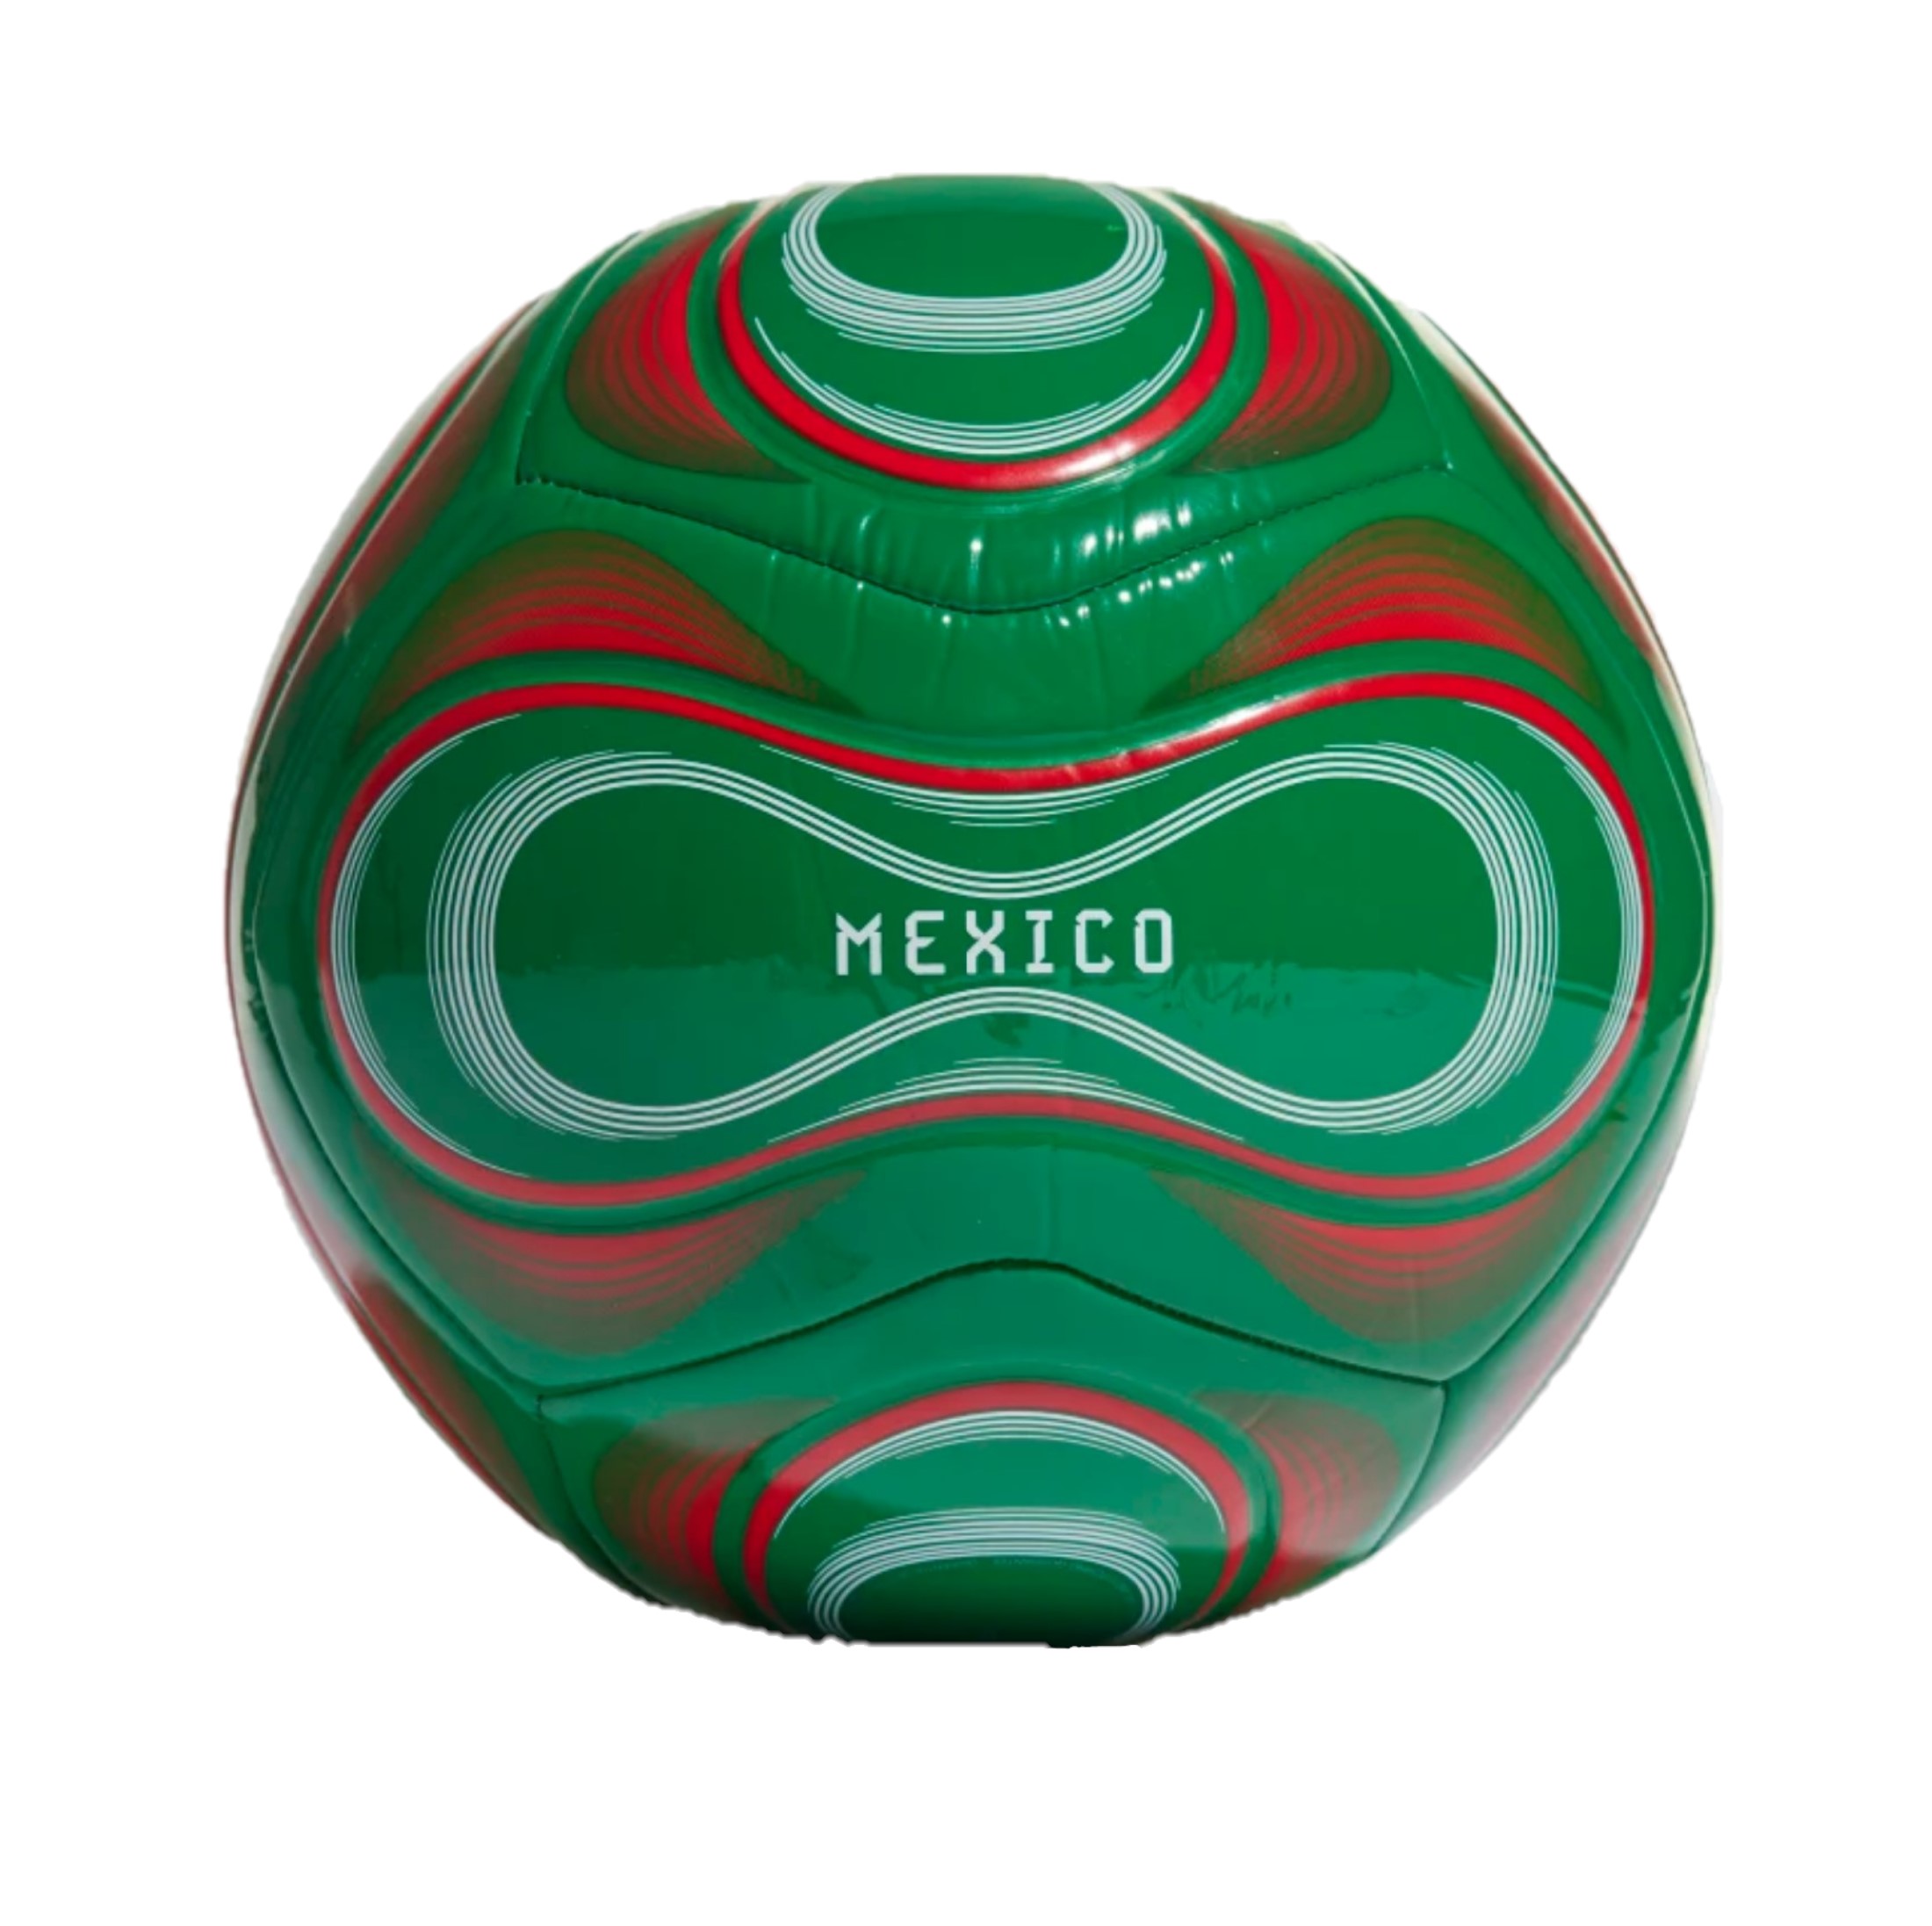 Adidas Mexico Club Soccer Ball-Size 5 - image 2 of 3